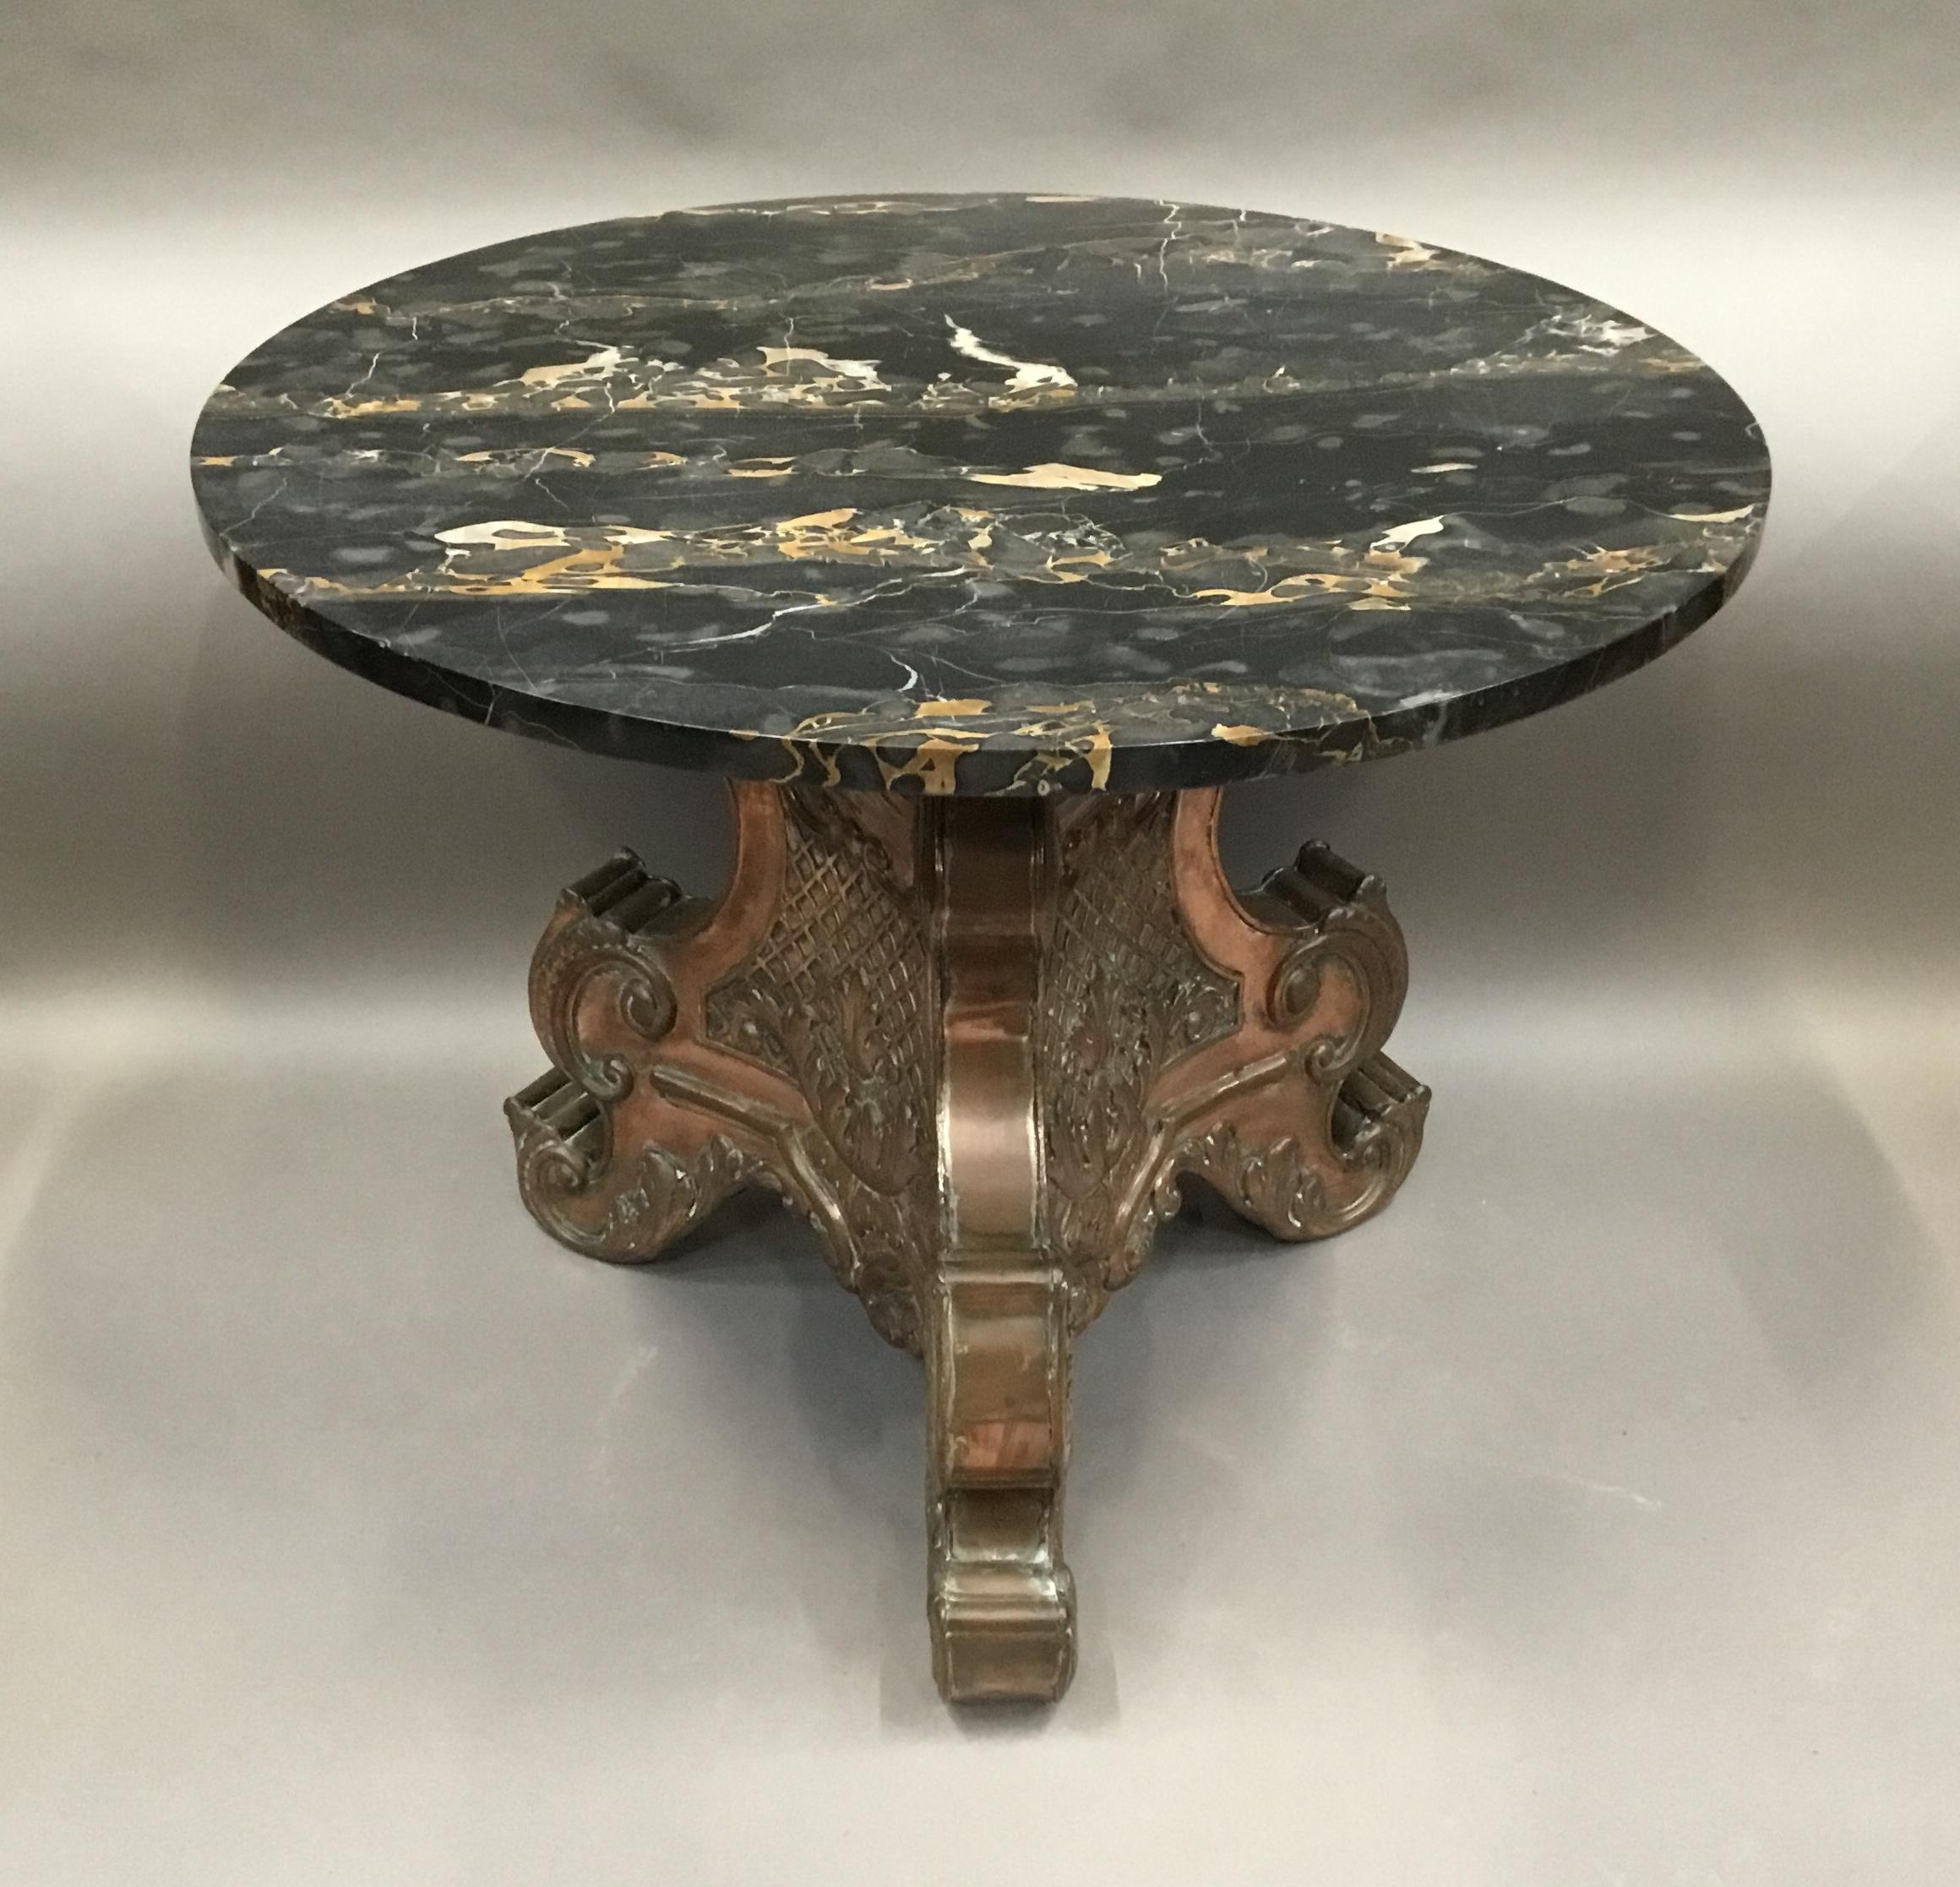 Renaissance Italian Copper and Marble Low Centre Table / Coffee Table B Battioli For Sale